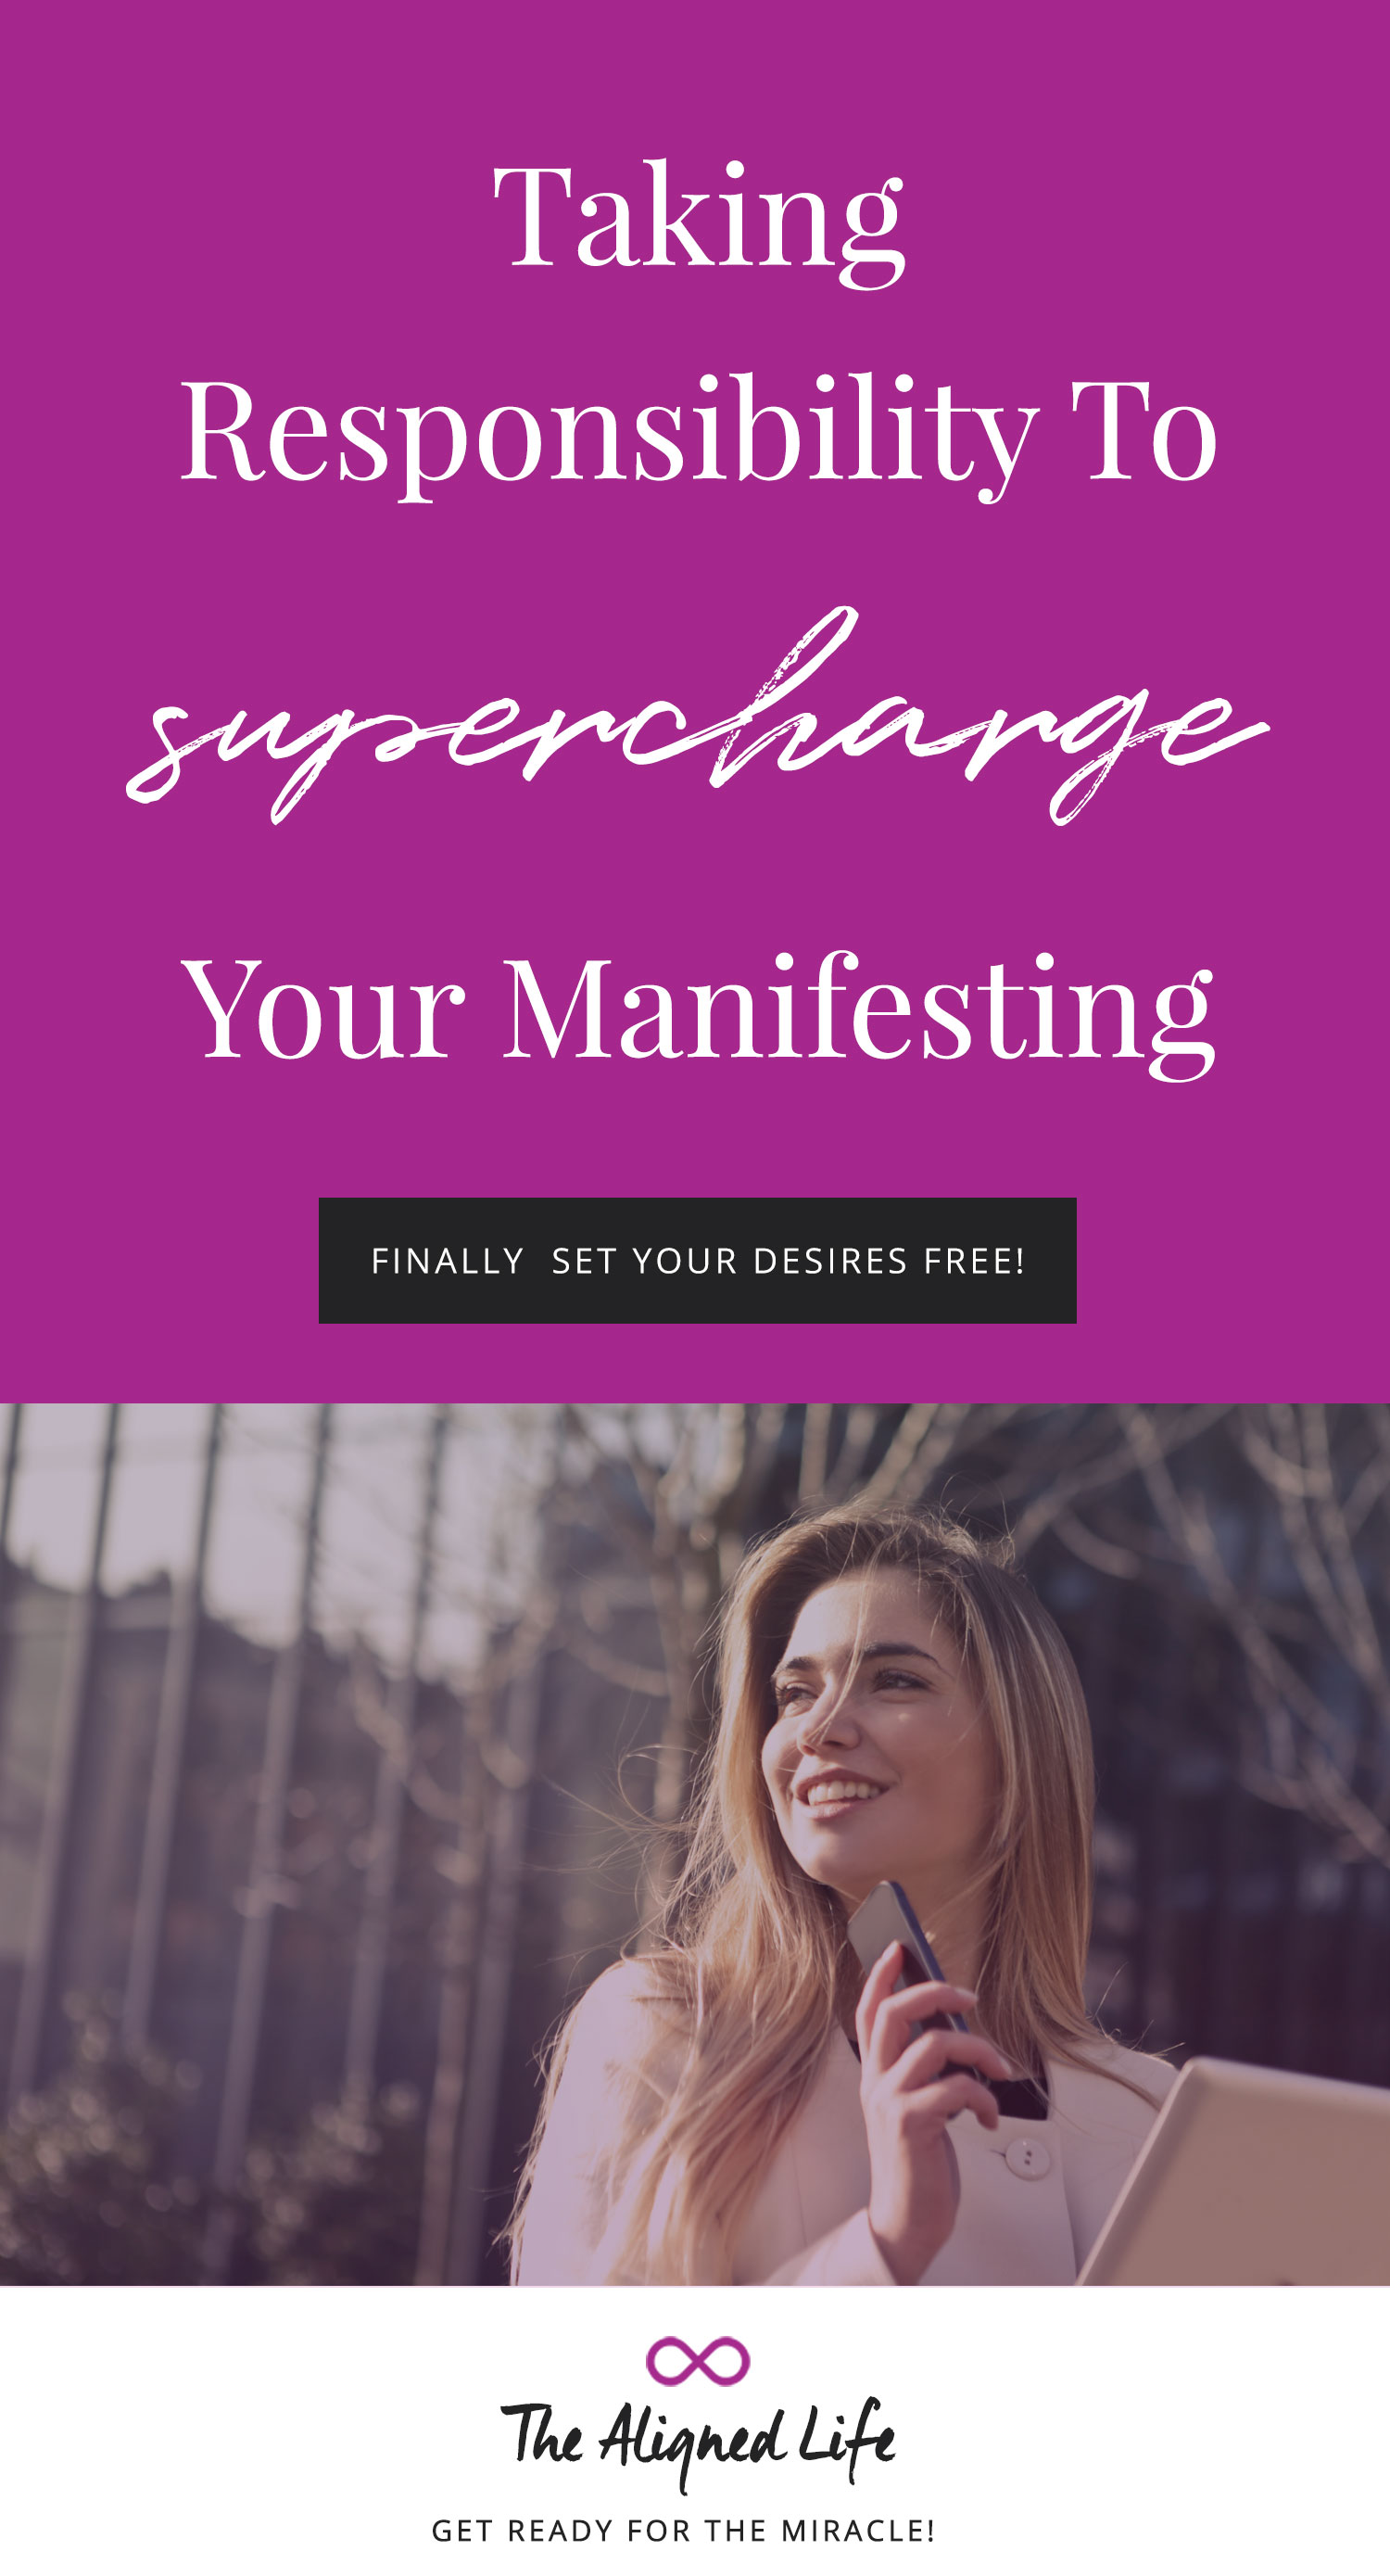 Taking Responsibility To Supercharge Your Manifesting